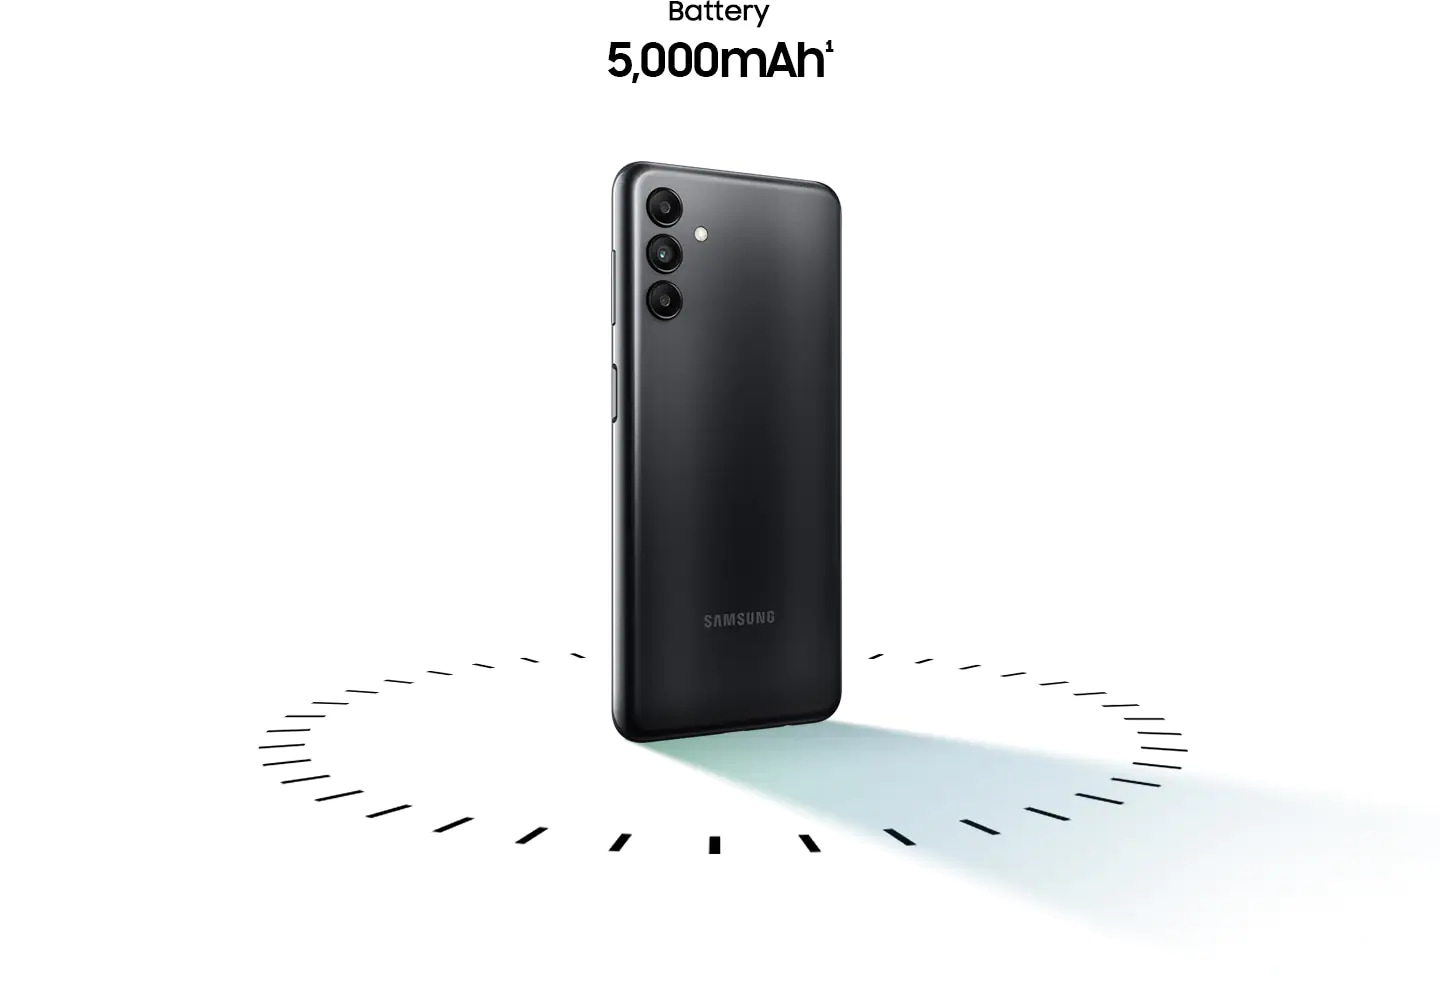 Check out user reviews on Samsung A04s battery specs now. Galaxy A04s is standing with its back turned, surrounded by a dotted circle. Above are the words Battery 5,000mAh